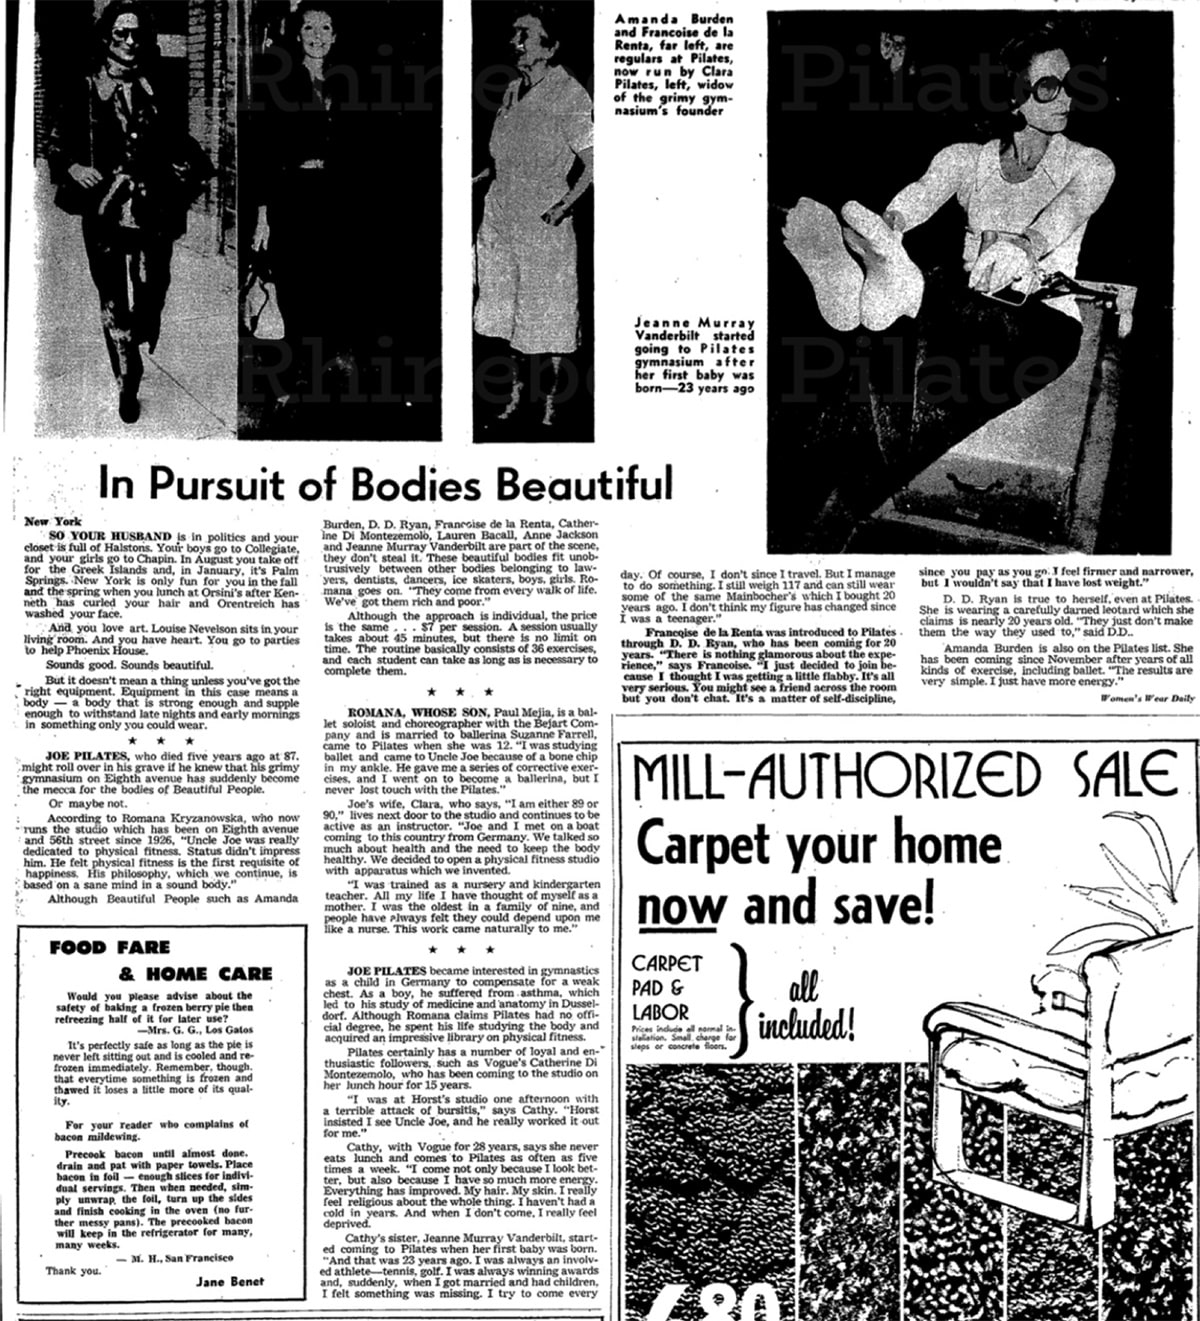 "In Pursuit of Bodies Beautiful" article